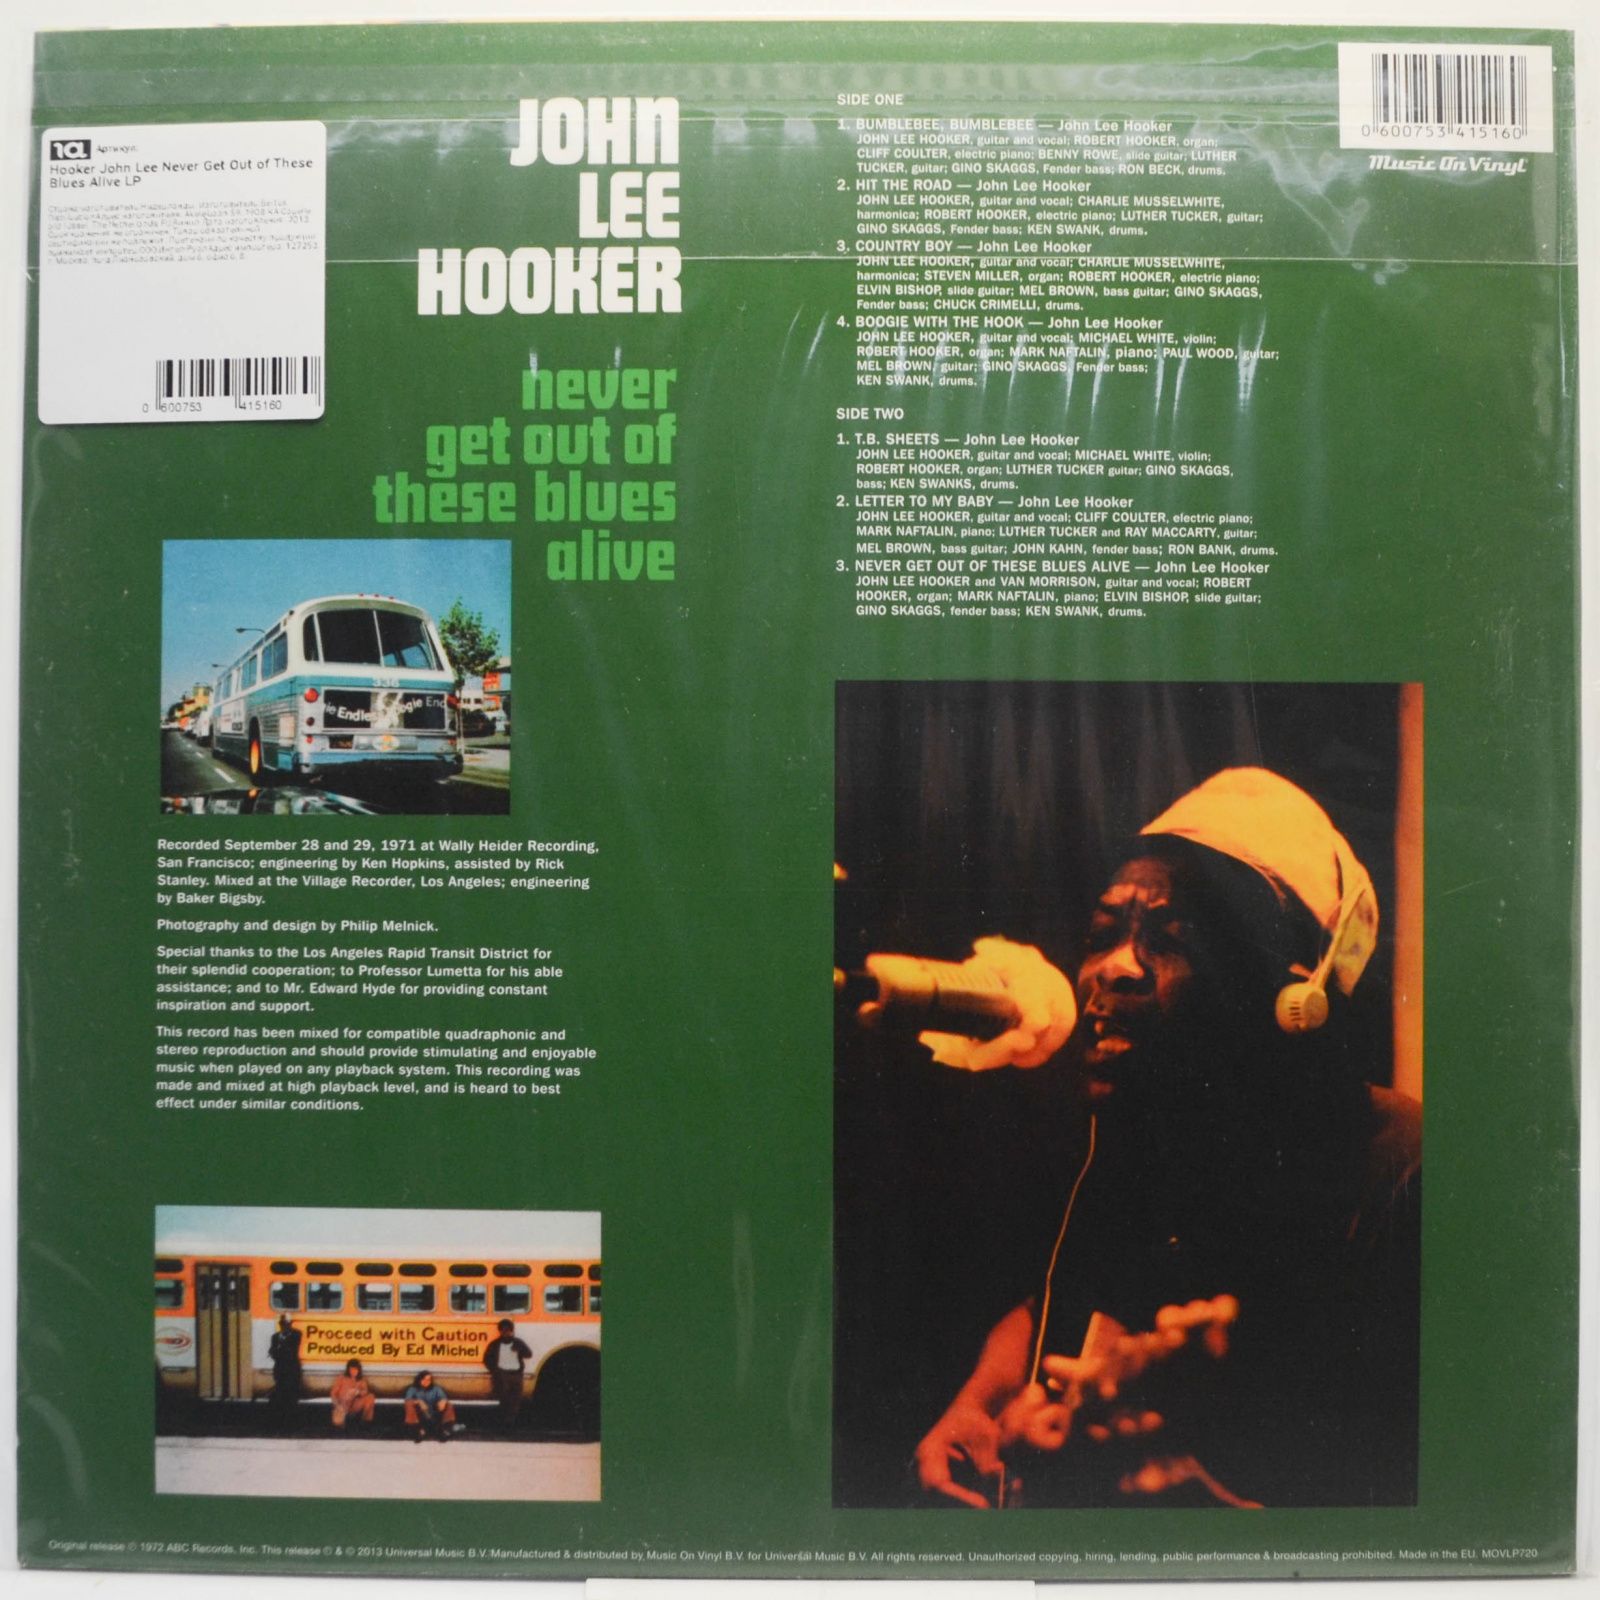 John Lee Hooker — Never Get Out Of These Blues Alive, 1972